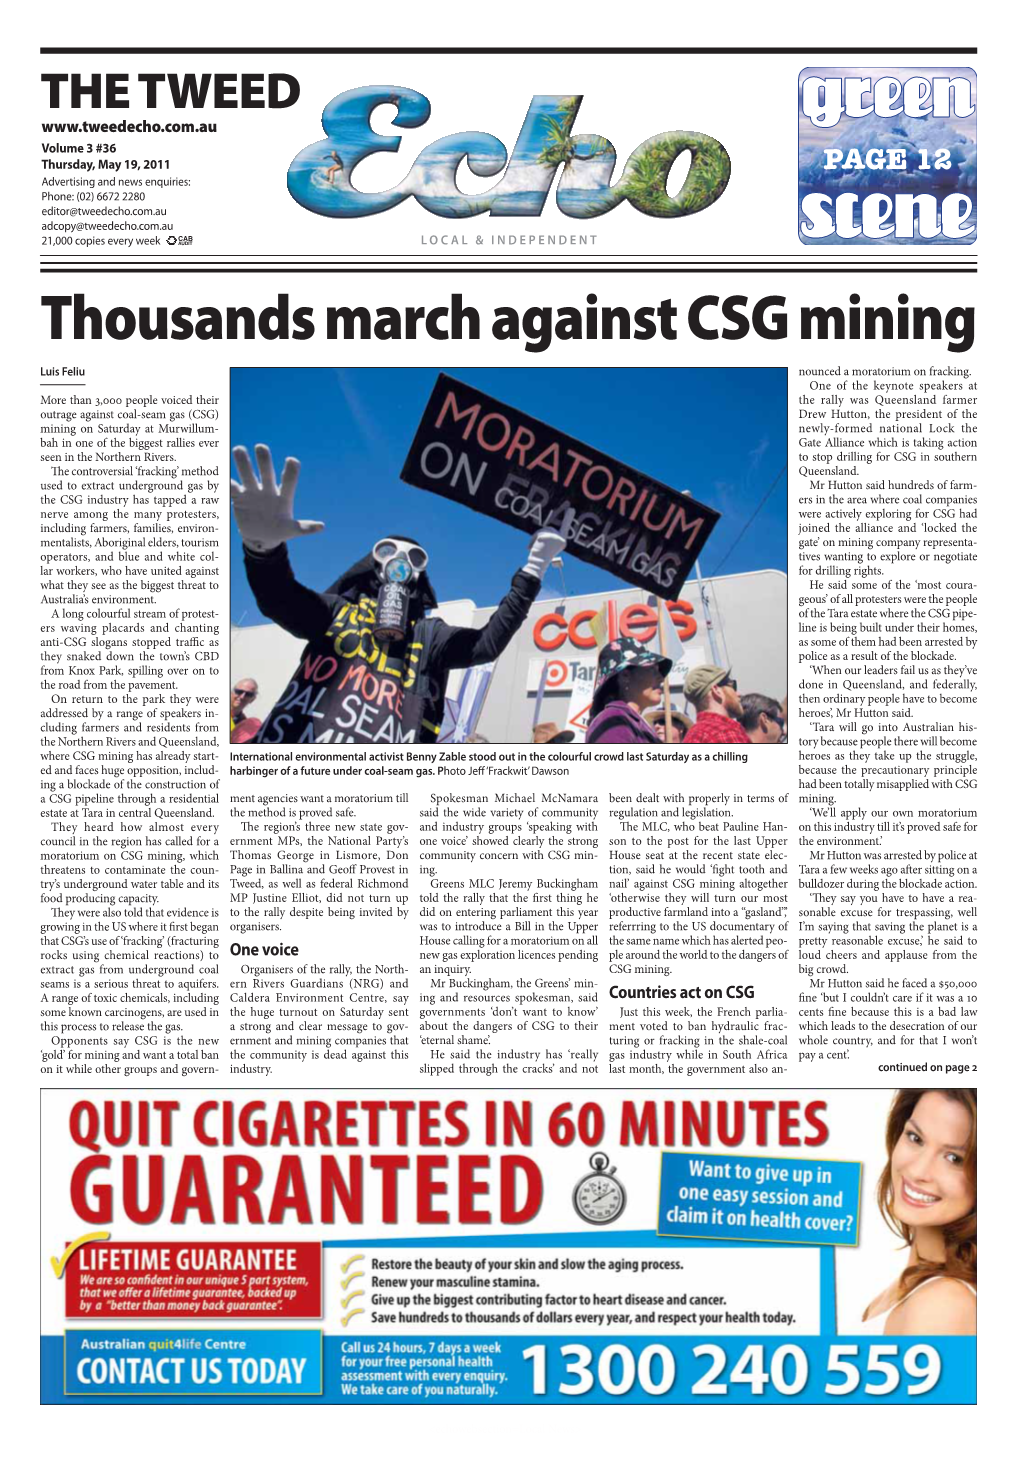 Thousands March Against CSG Mining